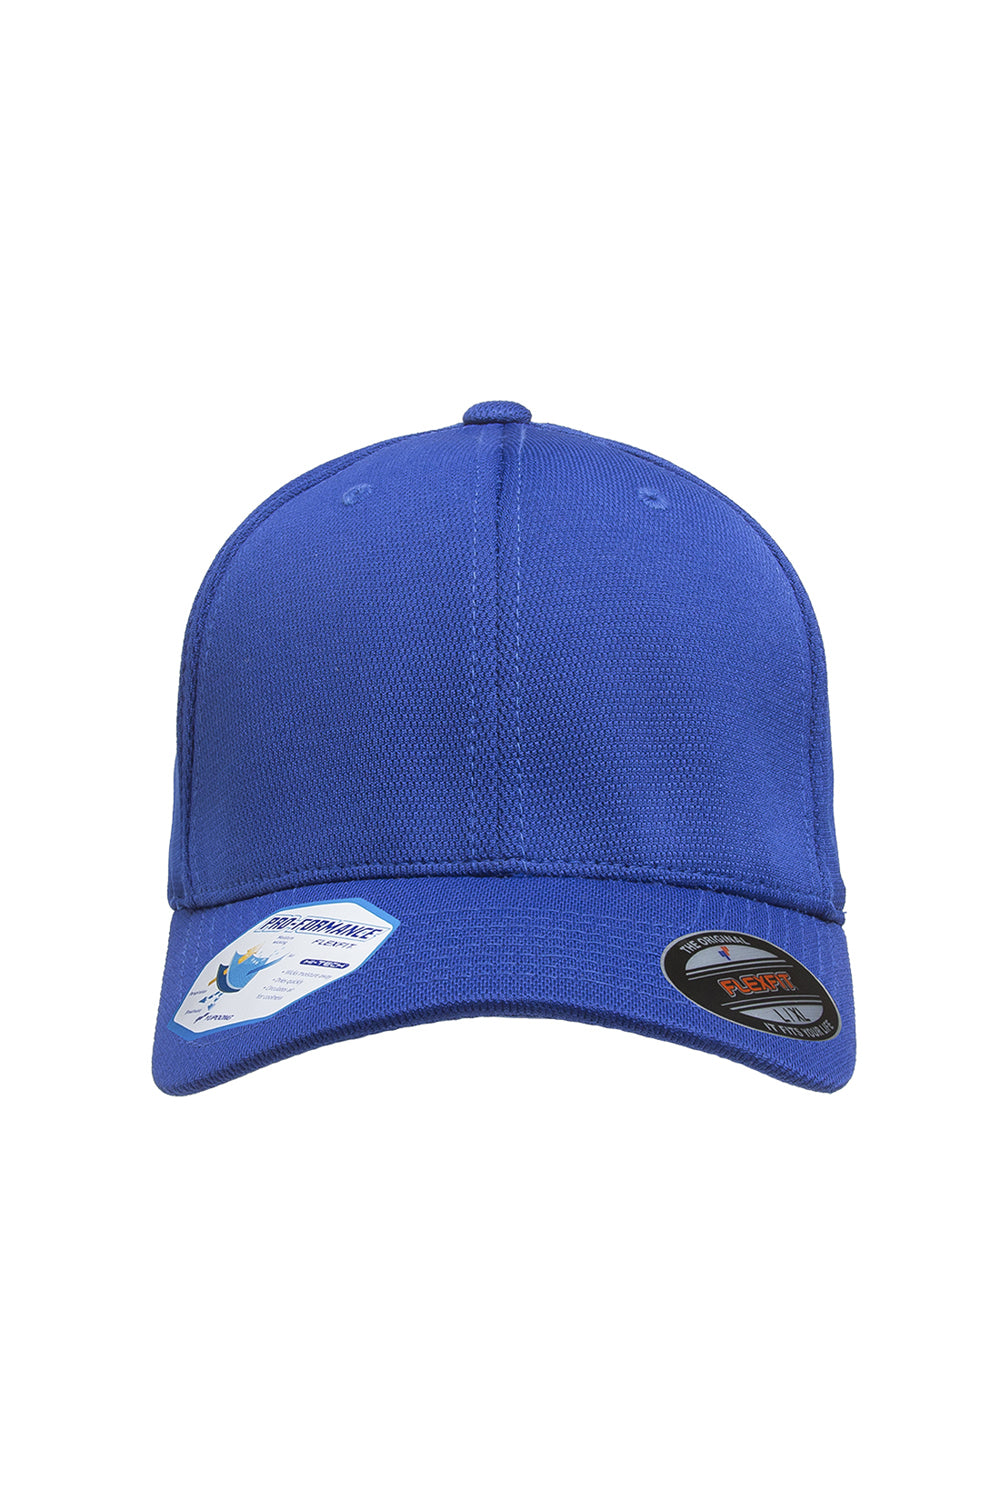 Flexfit 6597 Mens Cool & Dry Moisture Wicking Stretch Fit Hat Royal Blue Front